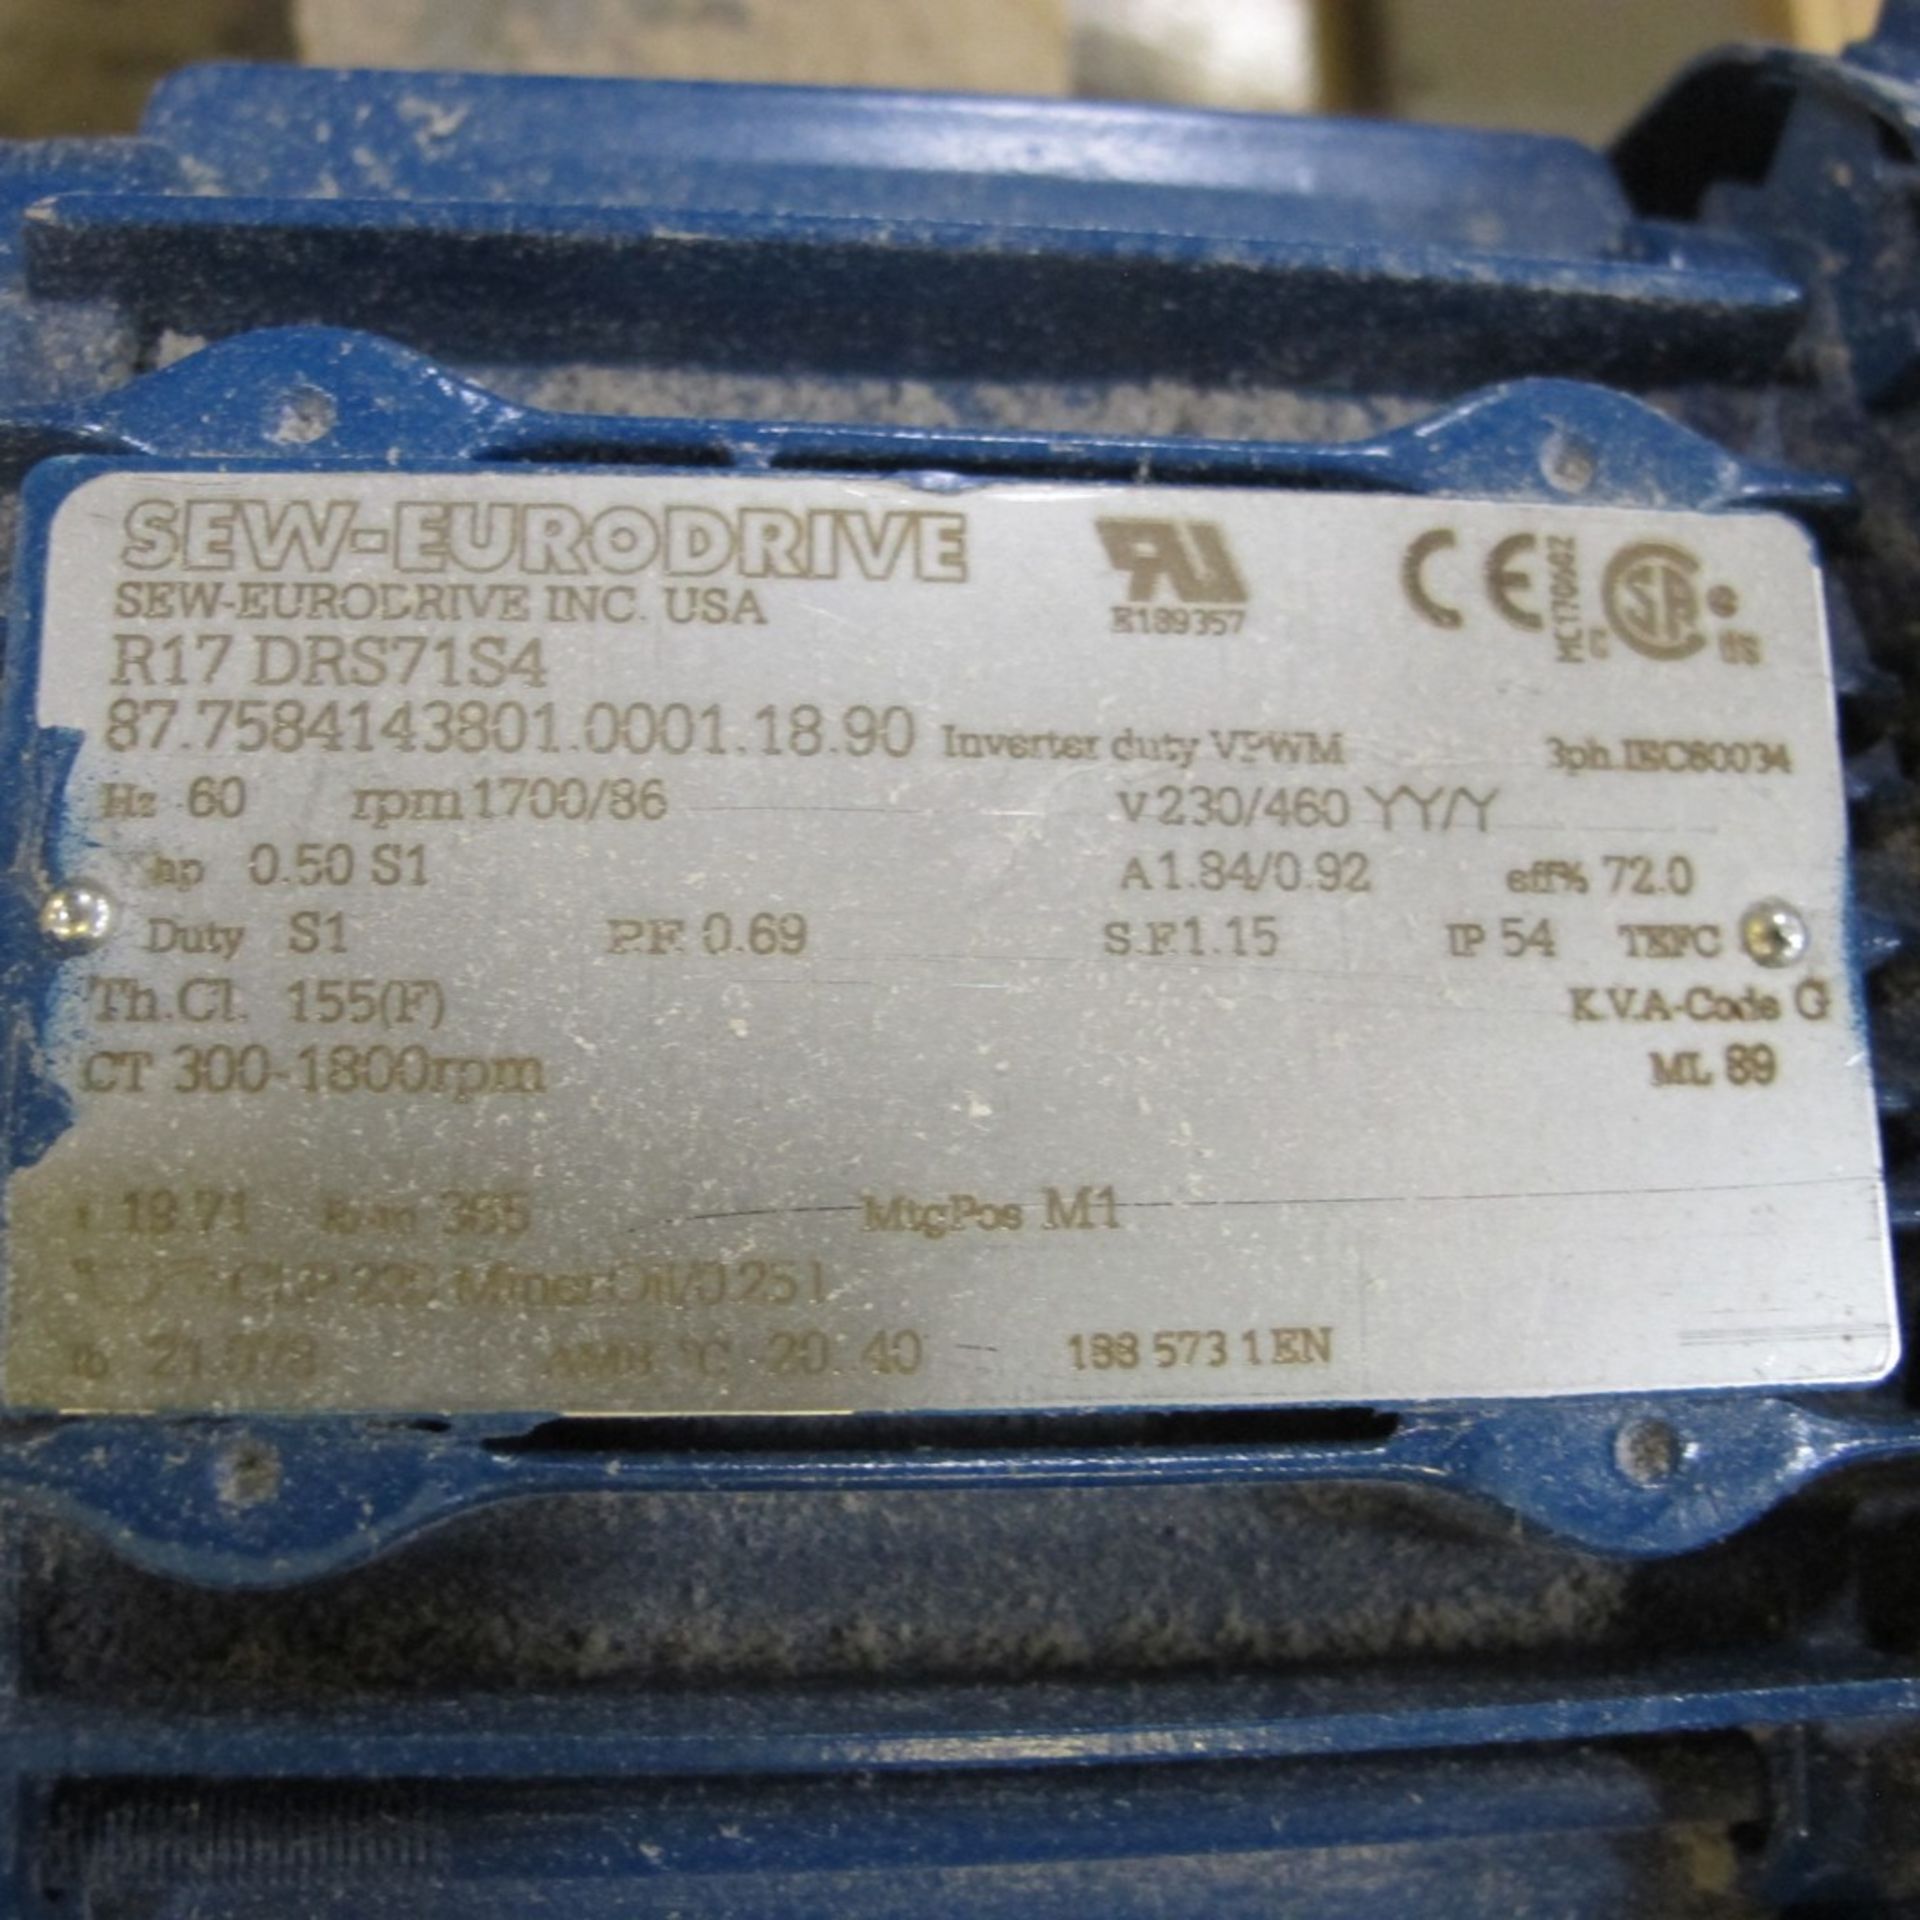 SEW EURODRIVE R17DRS71S4 SERVO DRIVE, 0.50 S1 HP, 230/460V, 1,700/86 RPM W/ GEARBOX/REDUCER 19.71 - Image 2 of 3